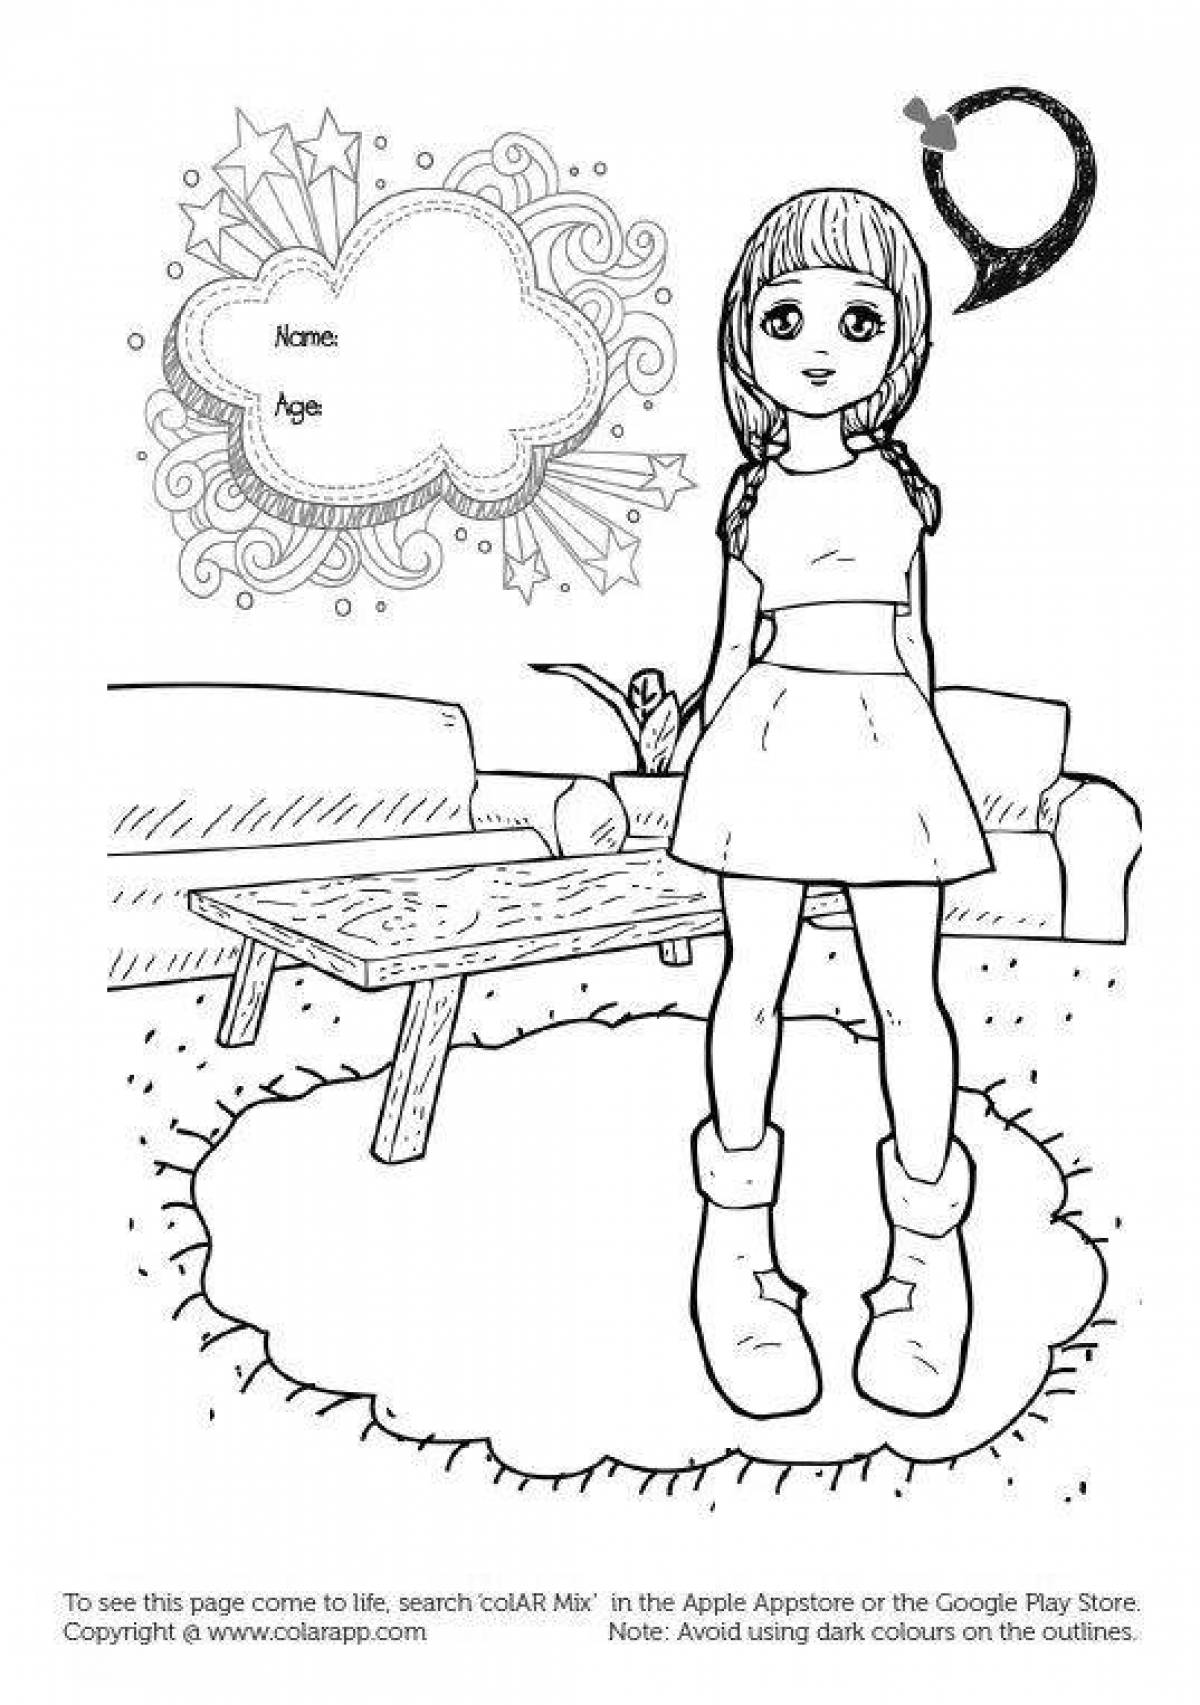 Coloring-fascination coloring page com